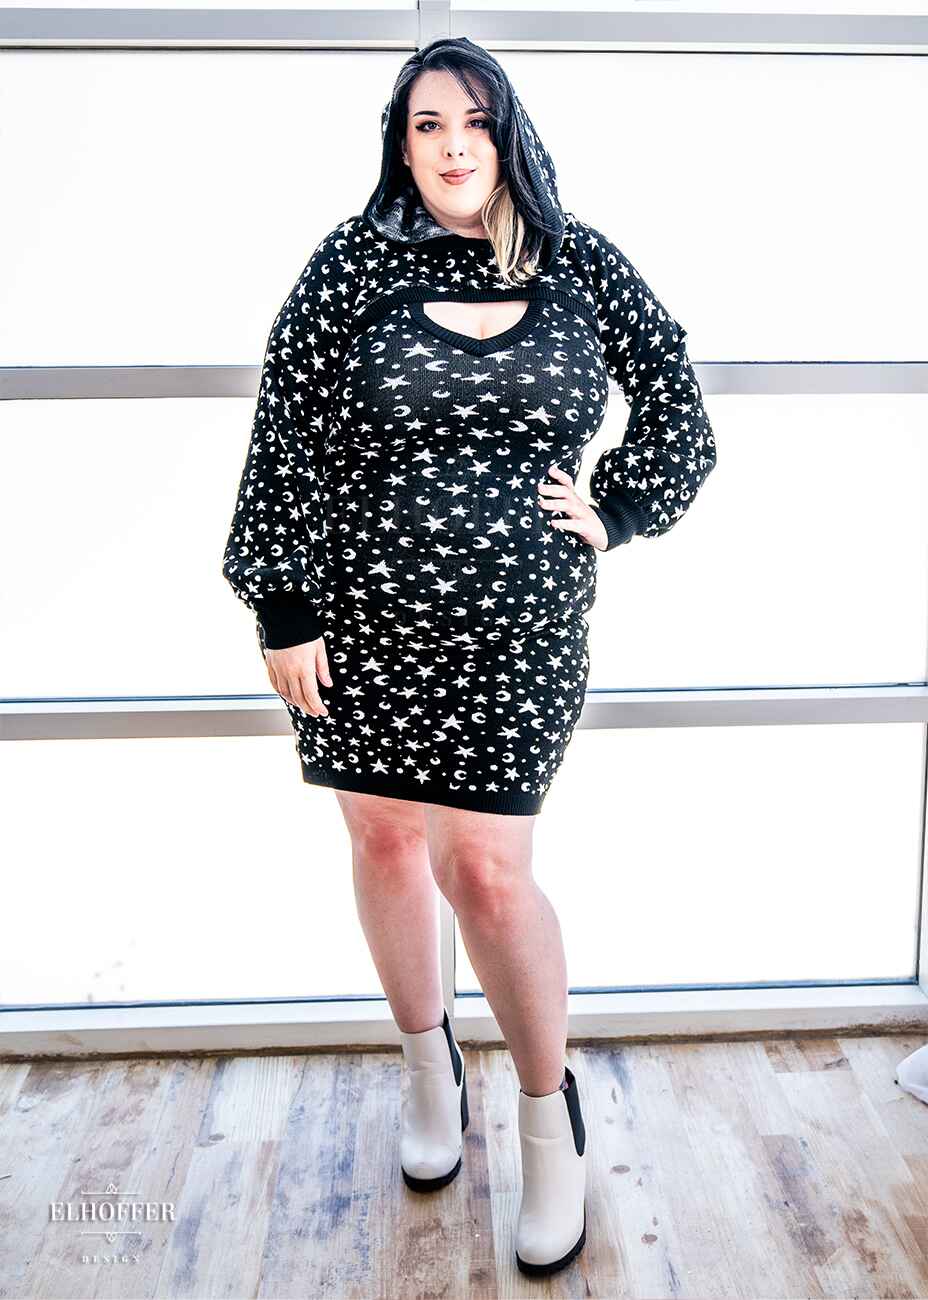 Katie Lynn, a fair skinned 2xl model with black and white hair, is wearing a black hooded super cropped knit shrug sweater with a white star and moon pattern, long billowing sleeves, and thumbholes, paired with a matching fitted knee length bodycon dress.